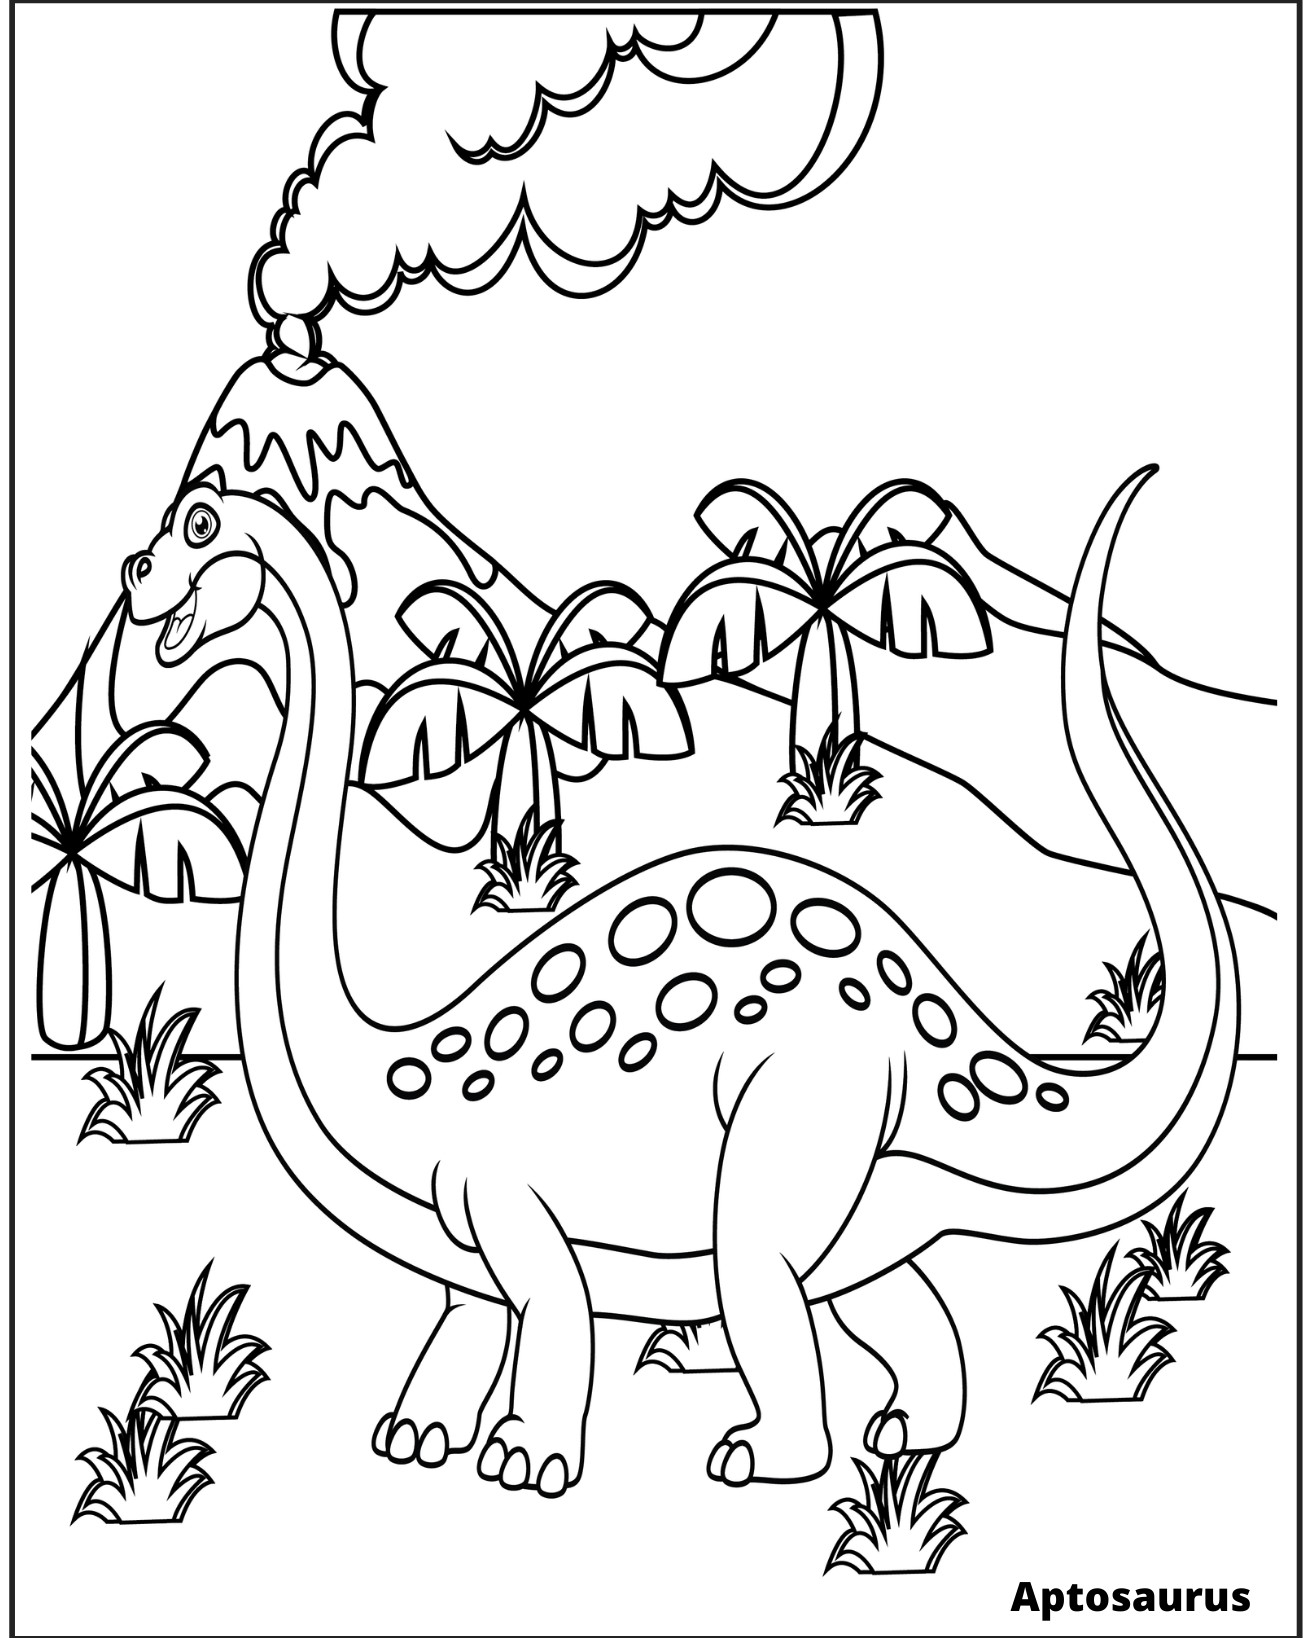 Volcano is actived Coloring Page